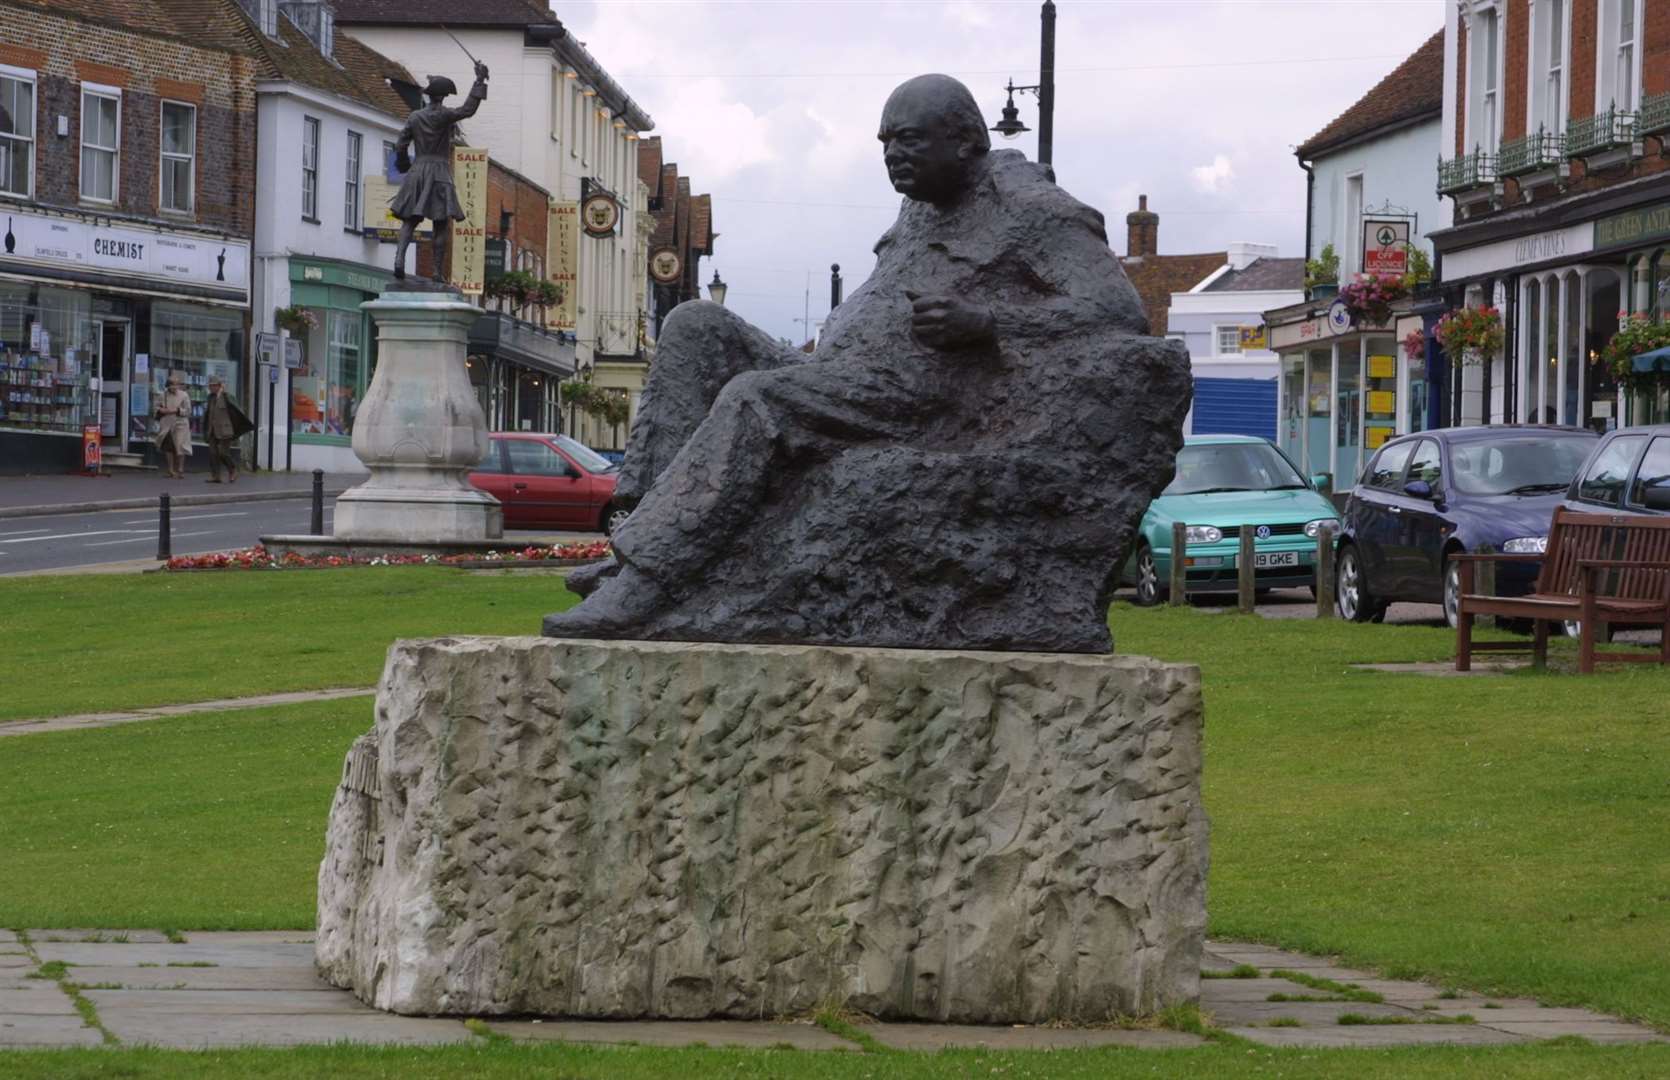 Westerham is best known as the home of Winston Churchill rather than for being a speeding hotspot. Picture: John Westhrop